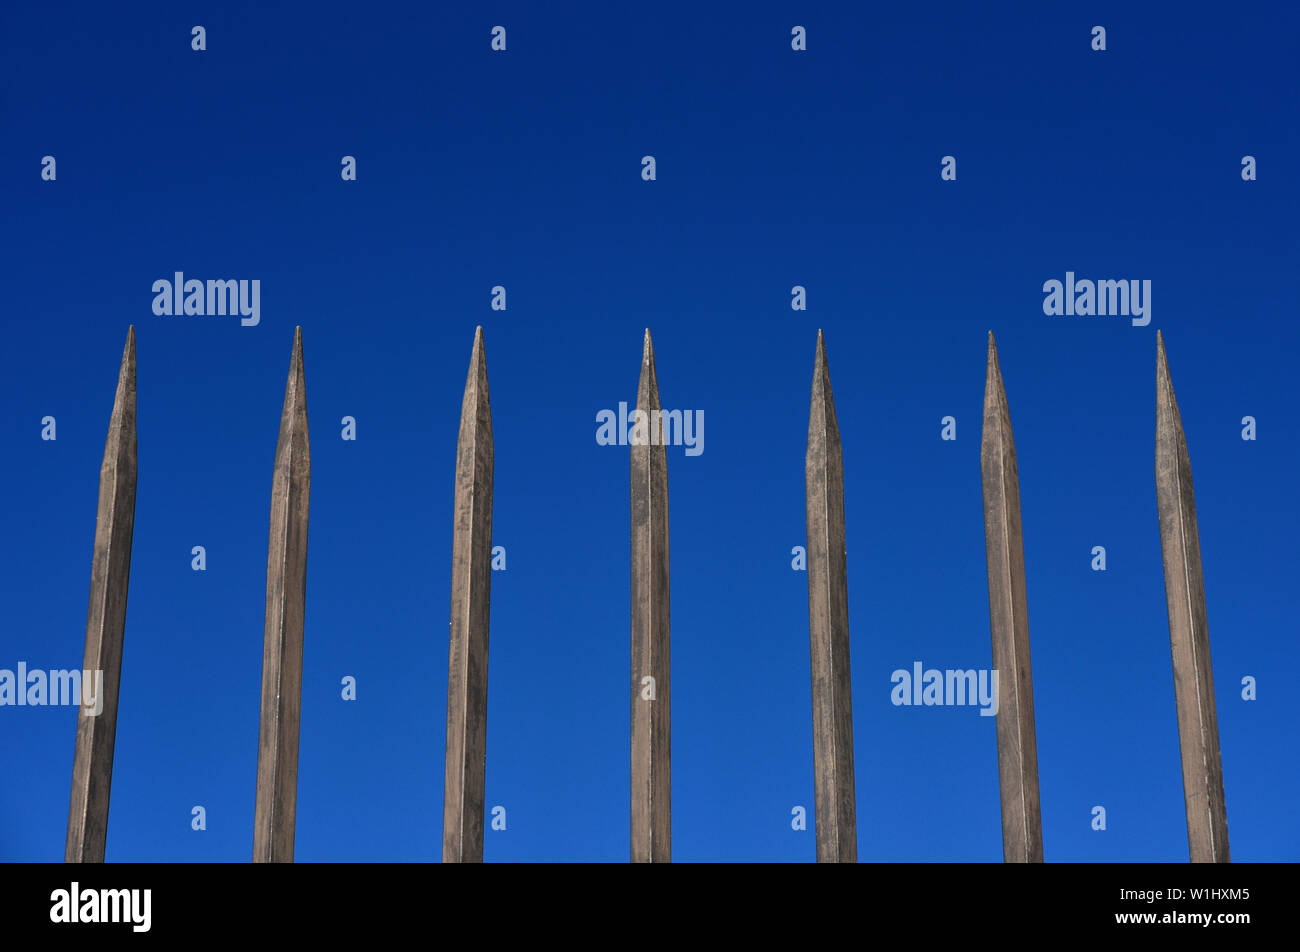 Steel fence barrier with pointed bars against blue sky. Concept of reclusion, obstacle, secutiry of protection Stock Photo